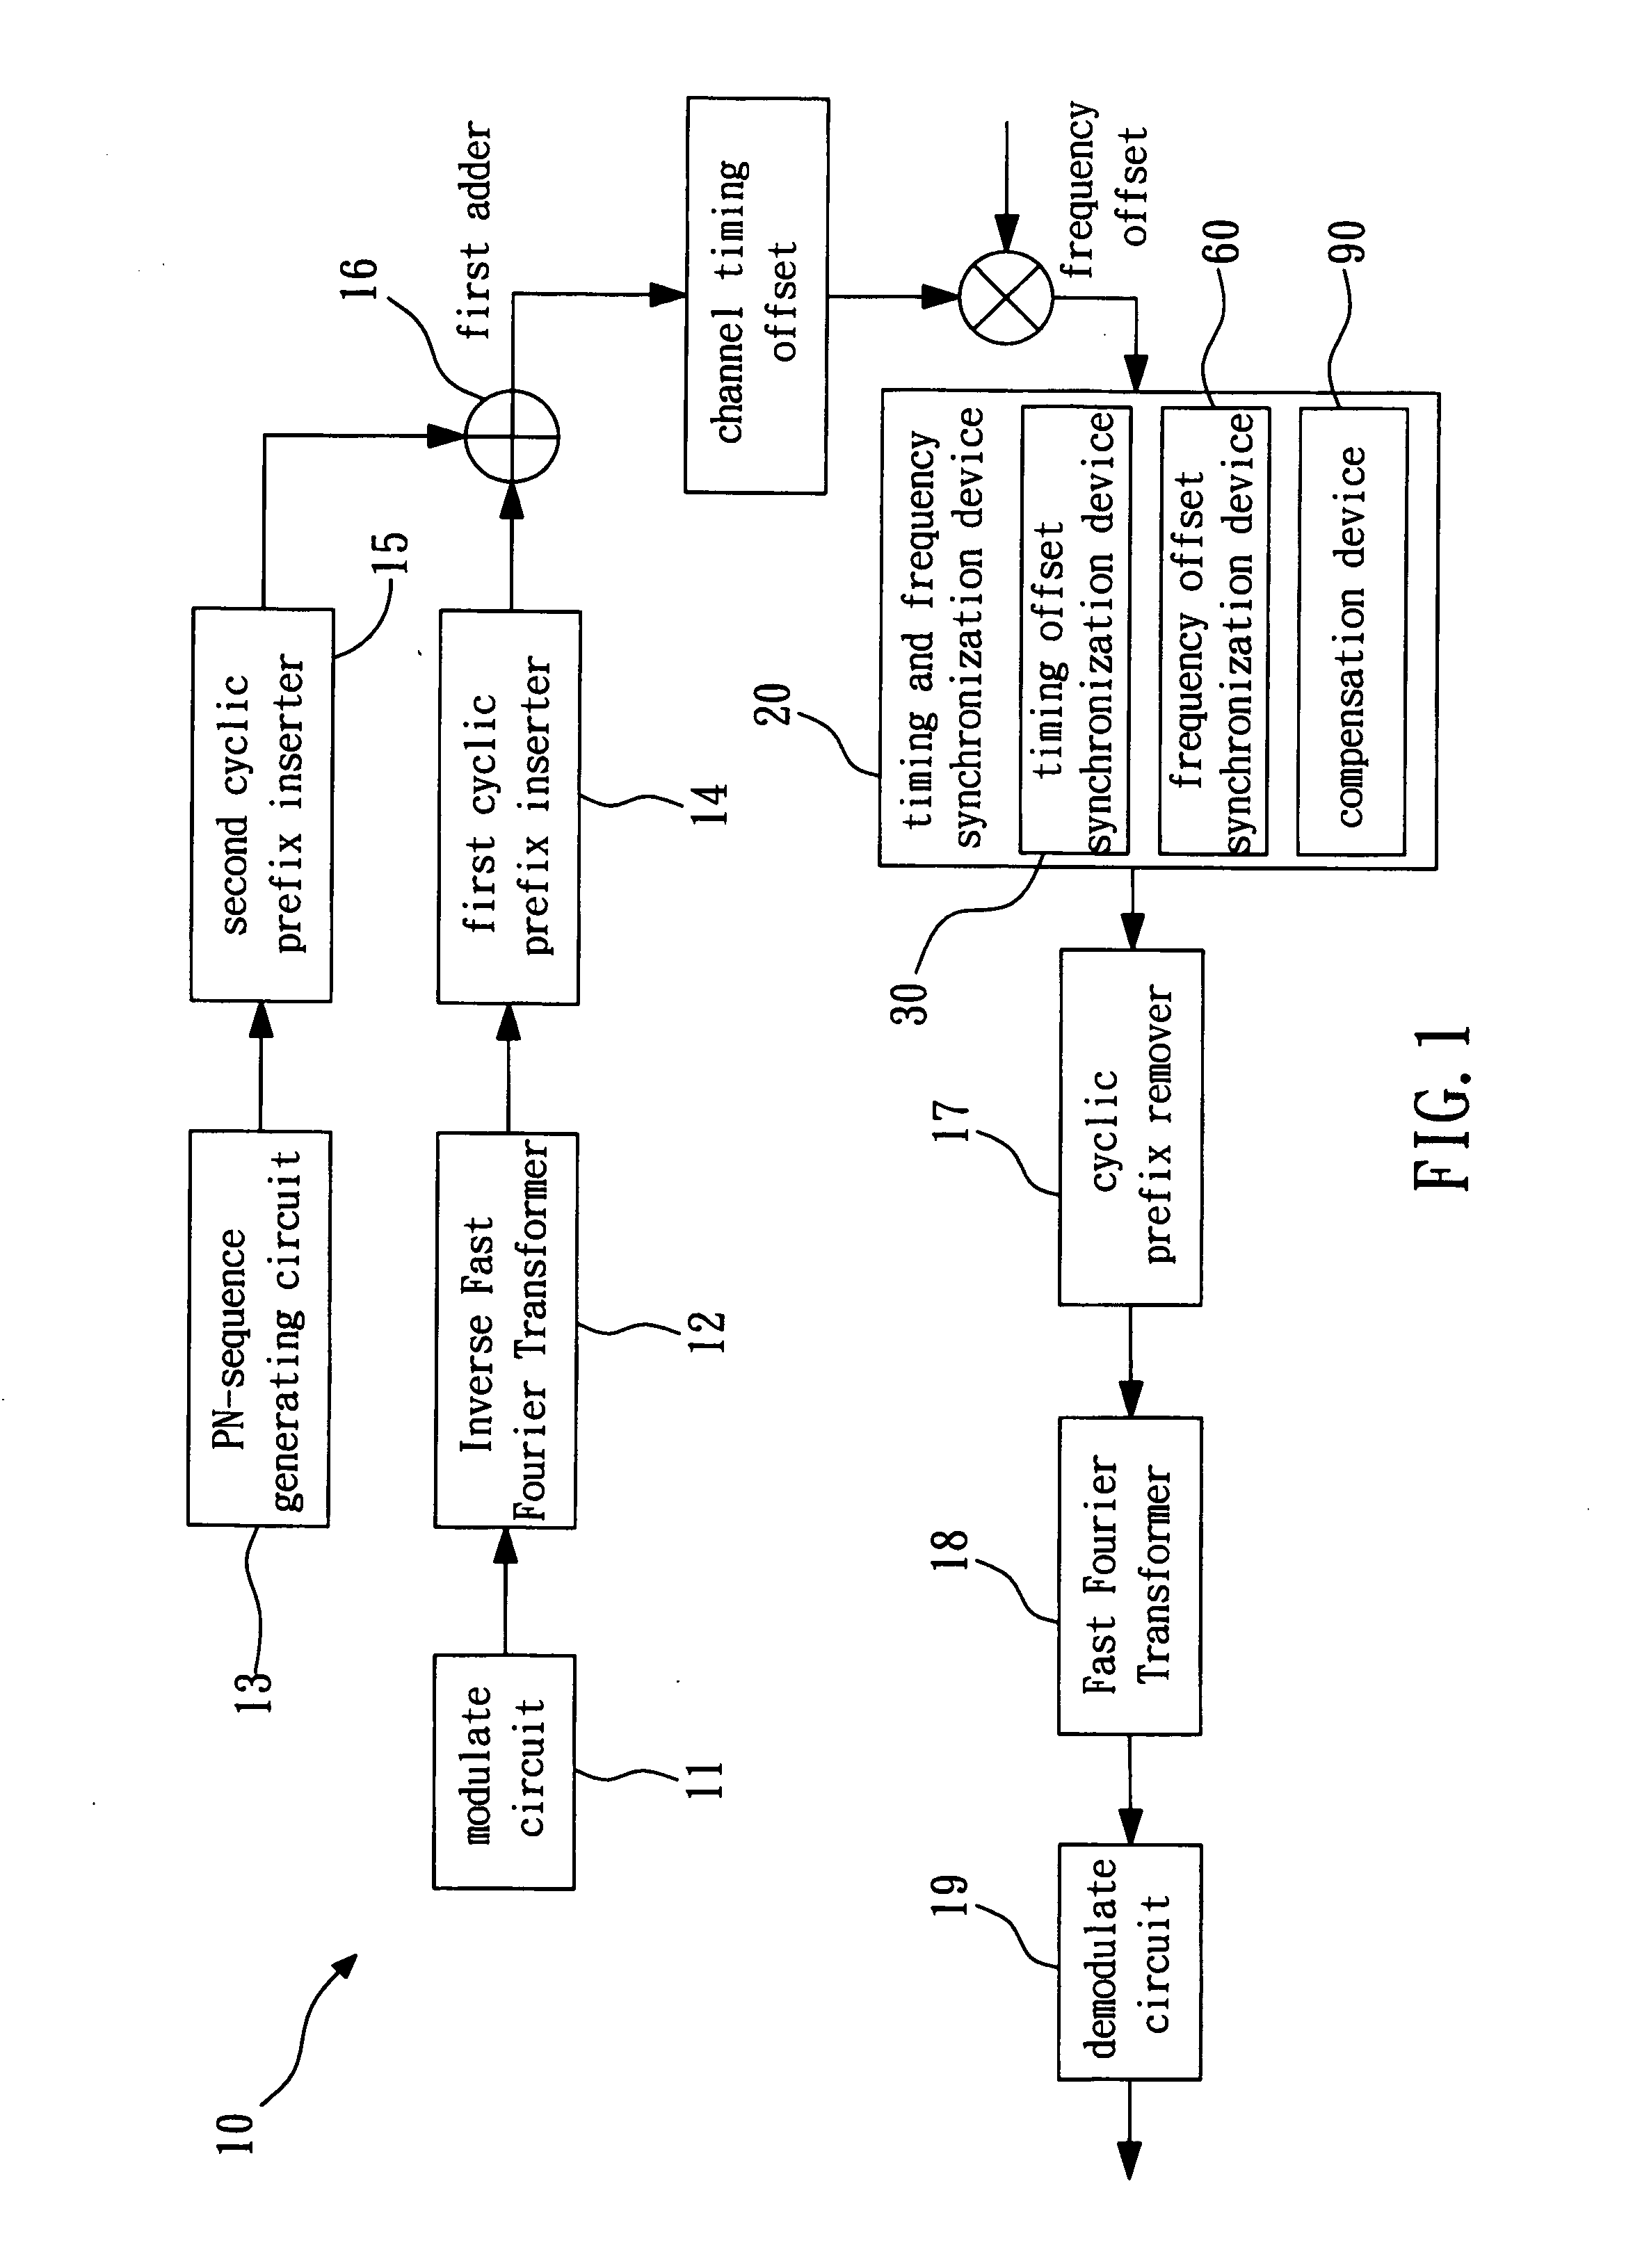 Orthogonal frequency division multiplexing system with PN-sequence